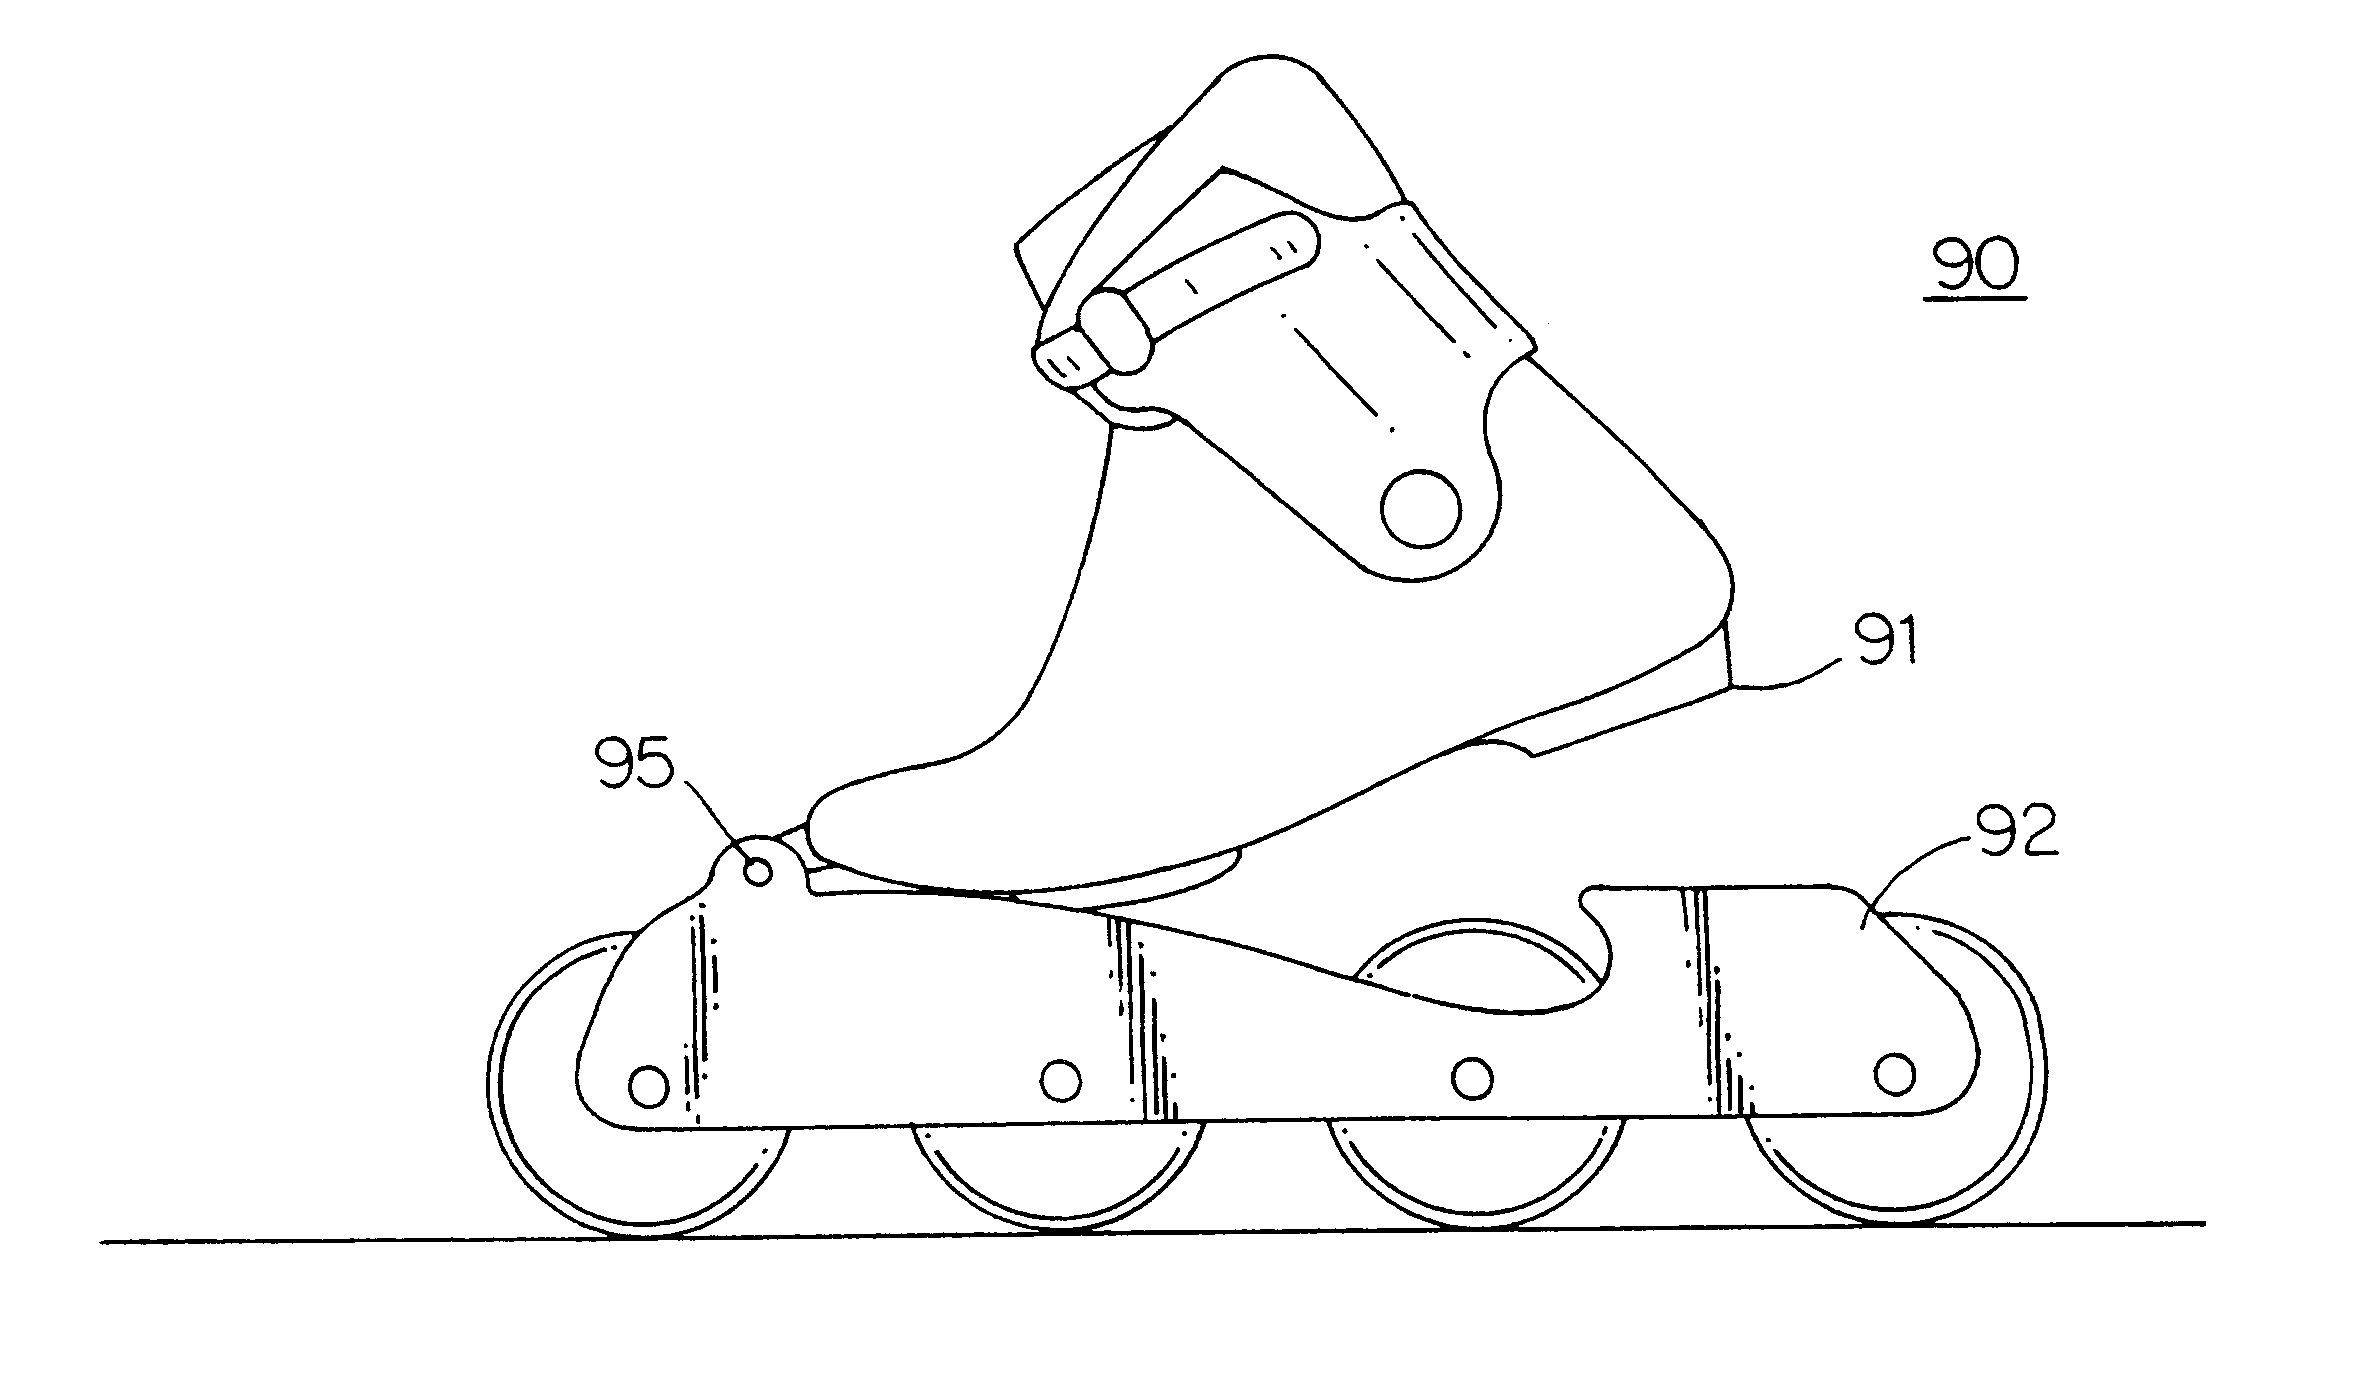 Footwear with a releasable pin for use in gliding sports